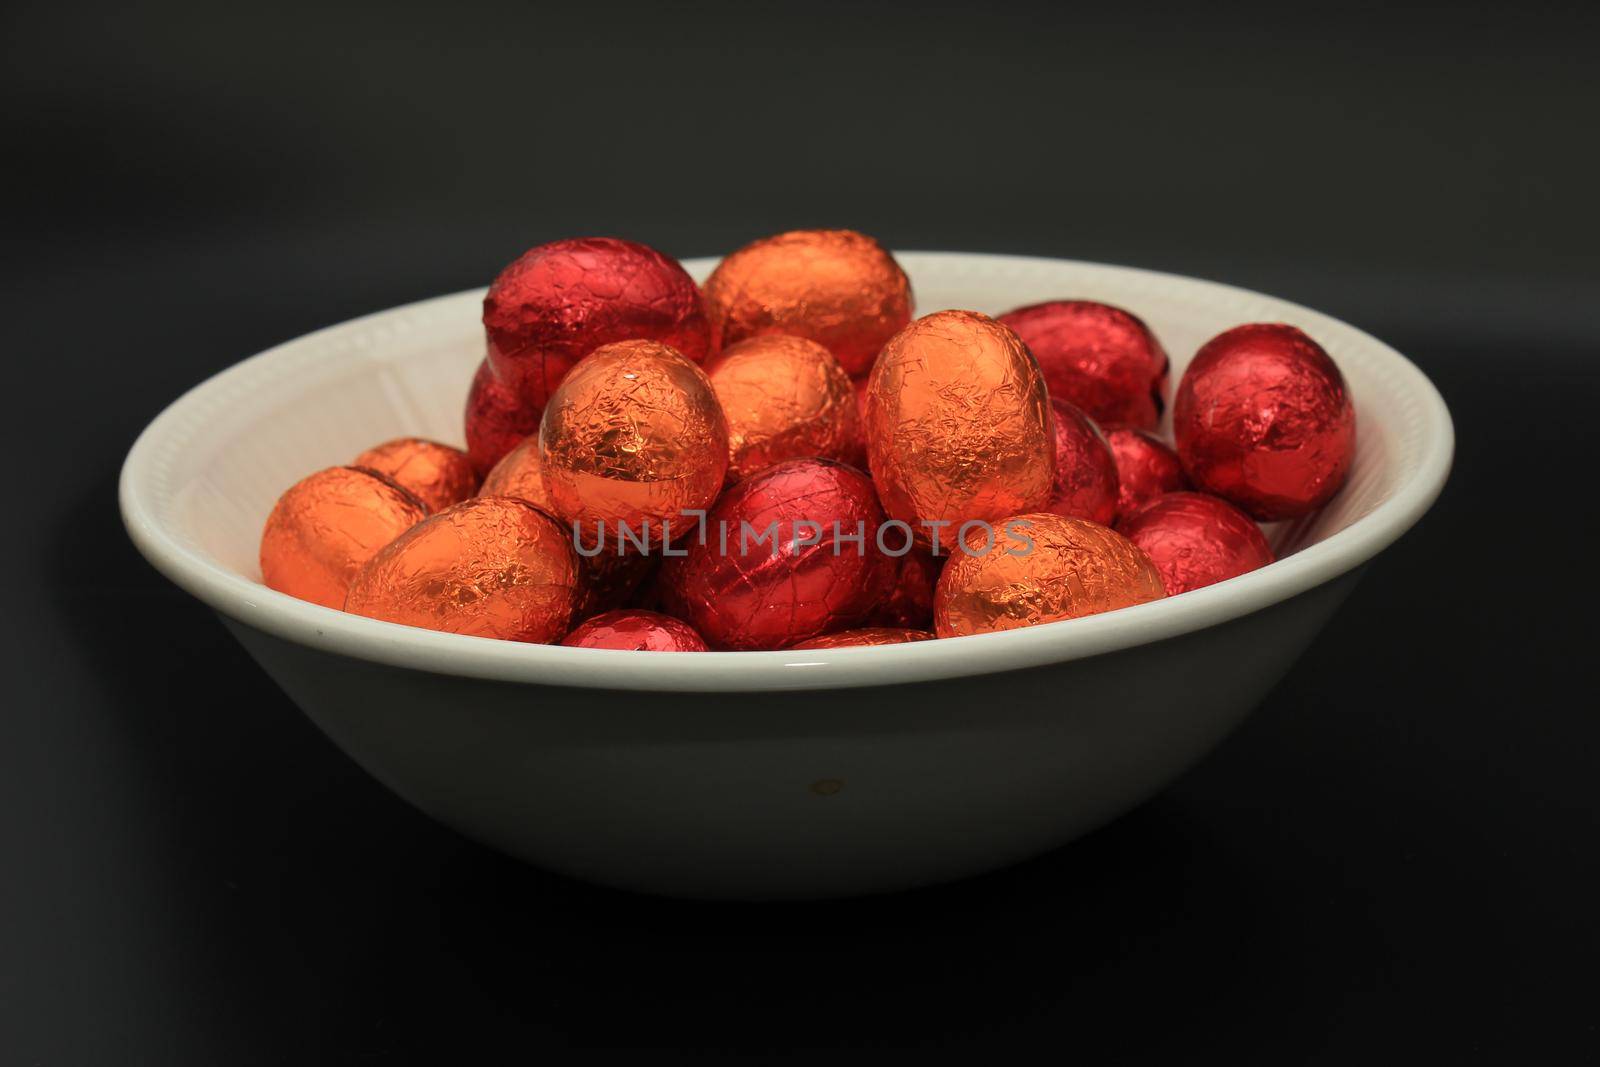 Foil wrapped chocolate easter eggs in a white porcelain bowl